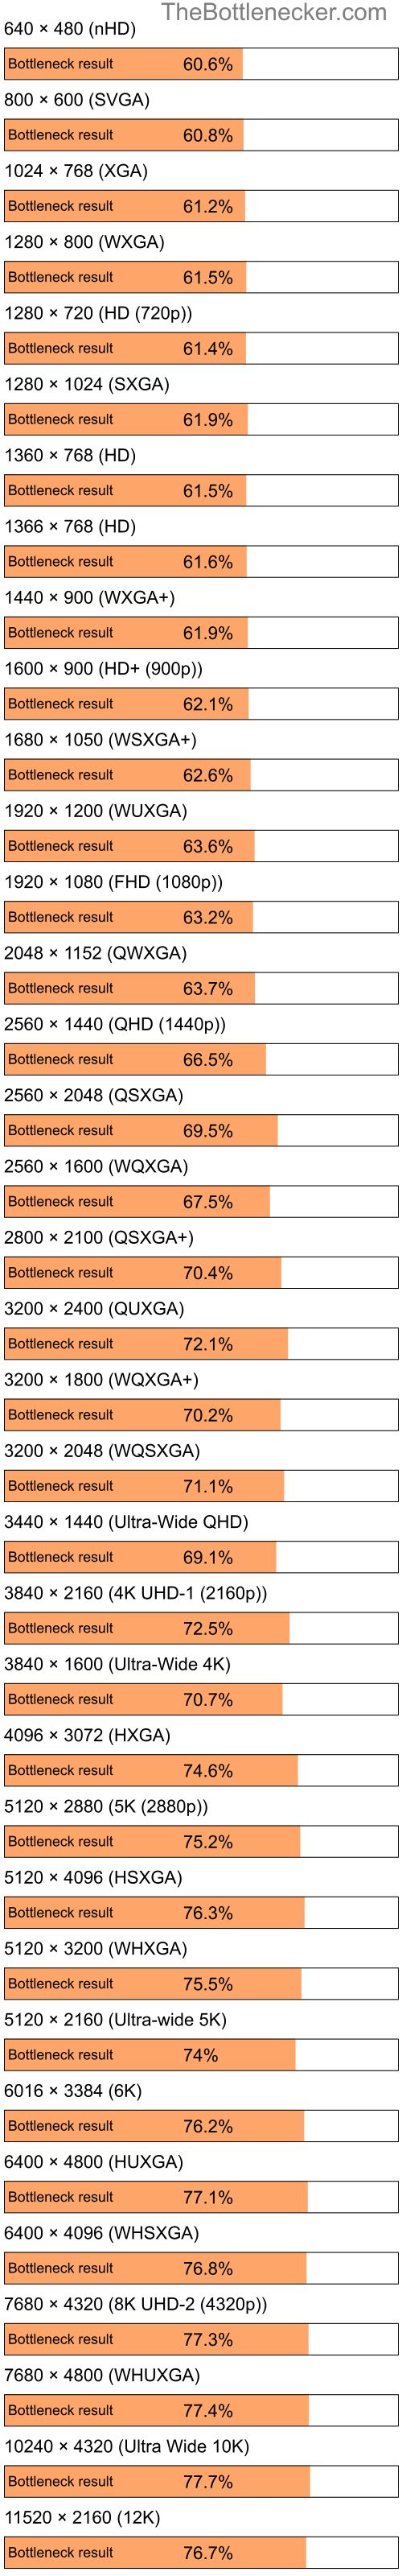 Bottleneck results by resolution for Intel Celeron M 410 and AMD Mobility Radeon X1700 in General Tasks